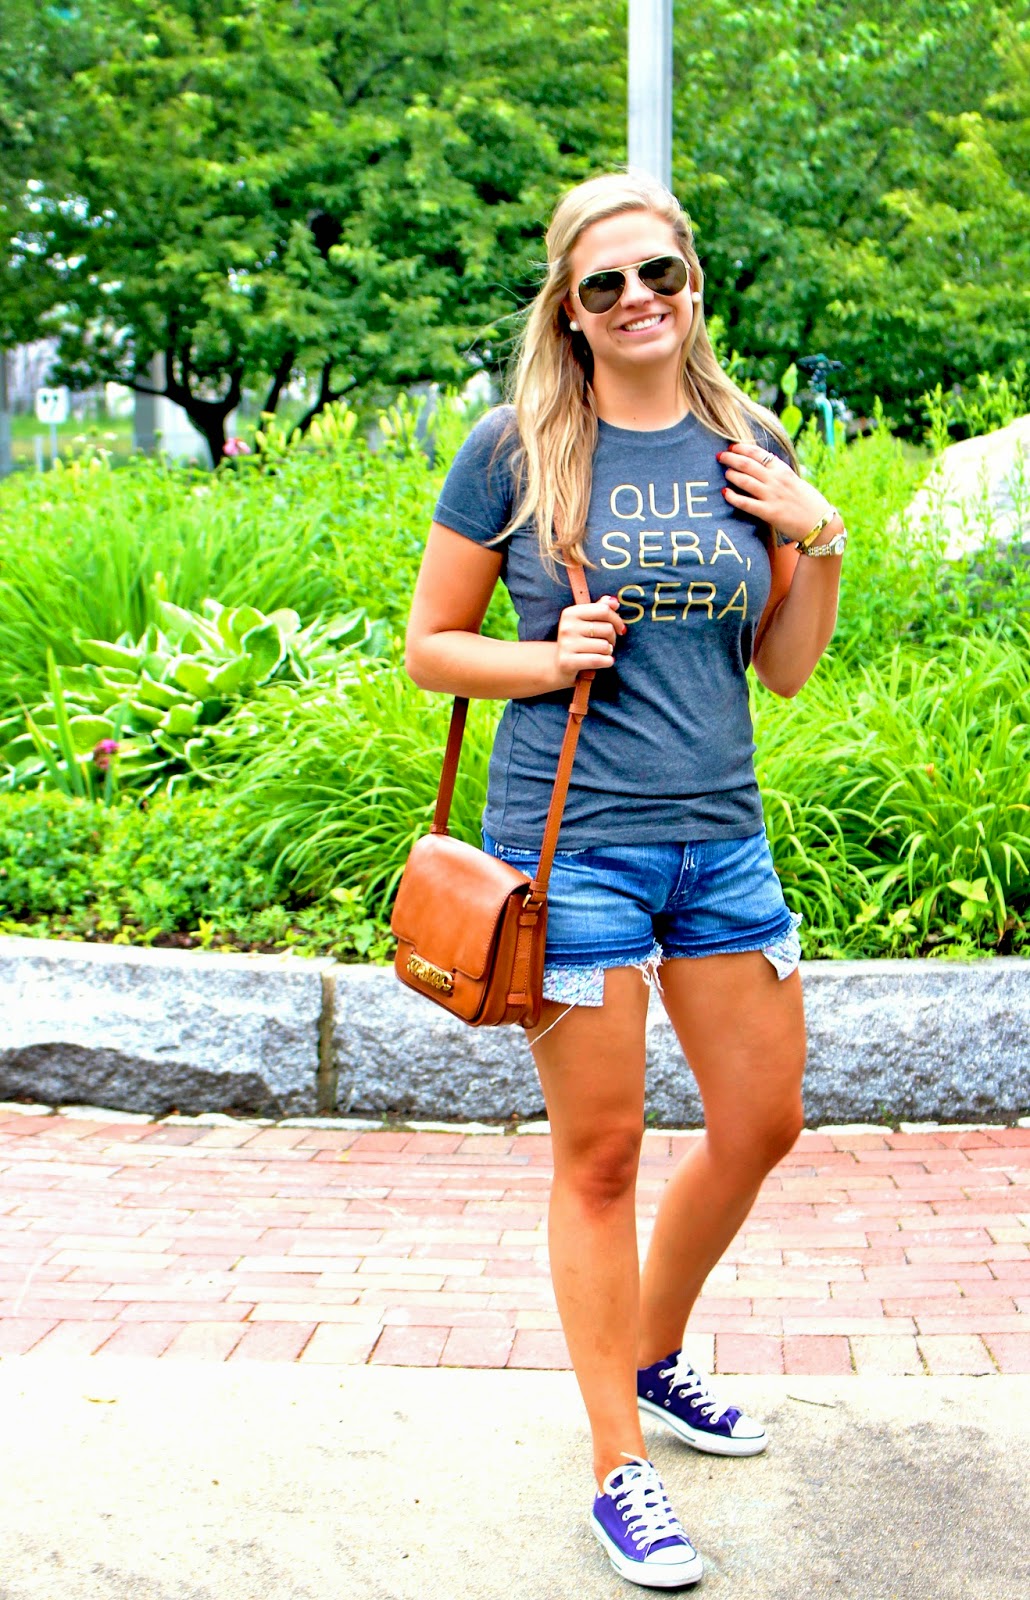 Style Cubby - Fashion and Lifestyle Blog Based in New England: Que Sera ...